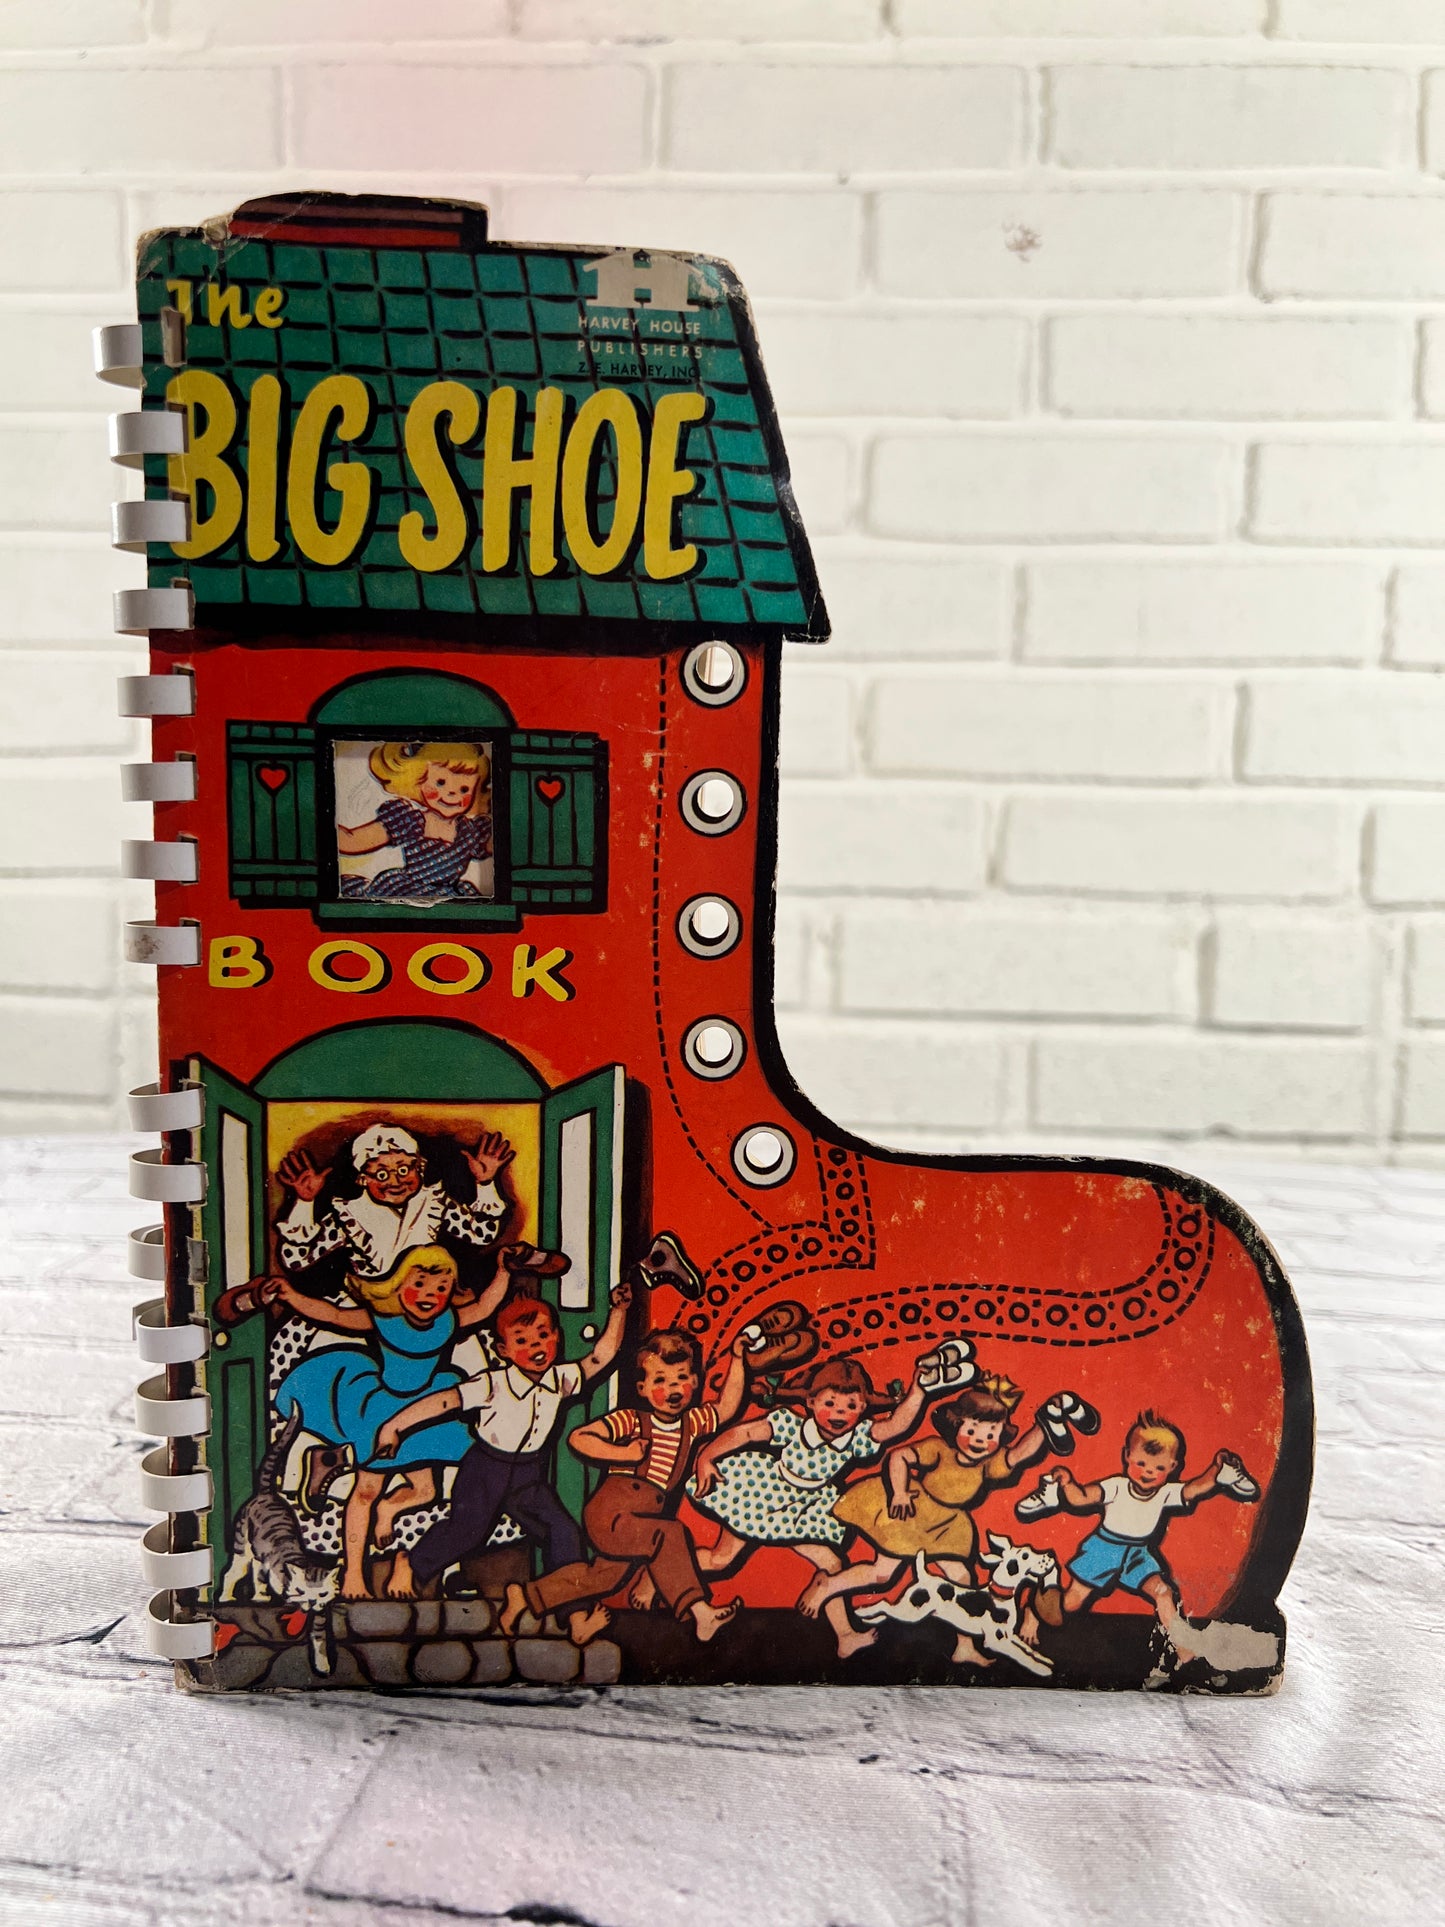 The Big Shoe Book by Virgina Brody pictures by Ollie Foy [1956]